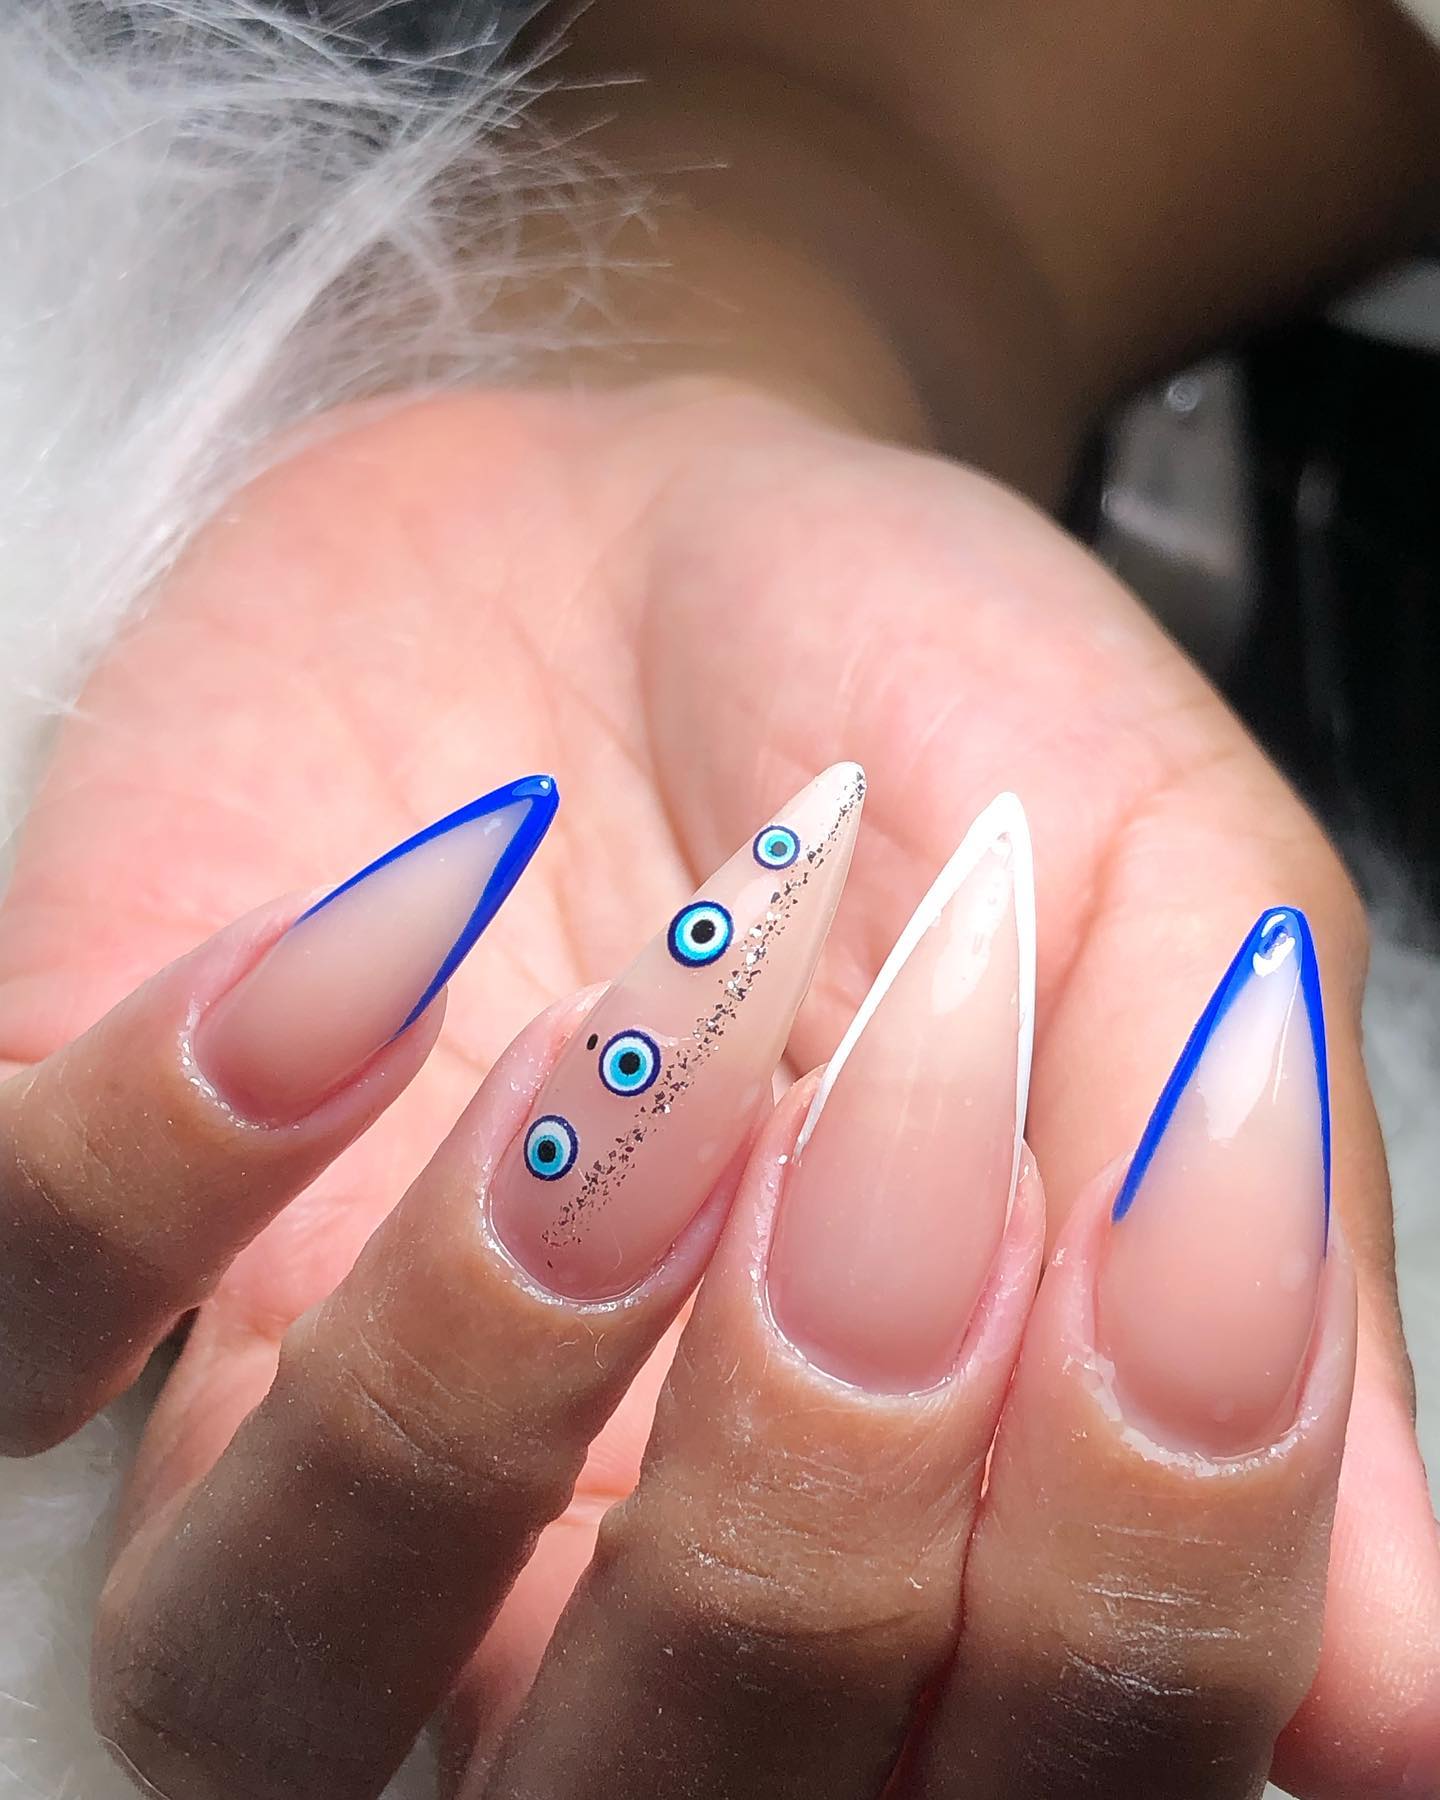 Wearing an evil eye is believed to protect you from evil, so wearing it as nail stickers is  great idea for your stiletto nails.